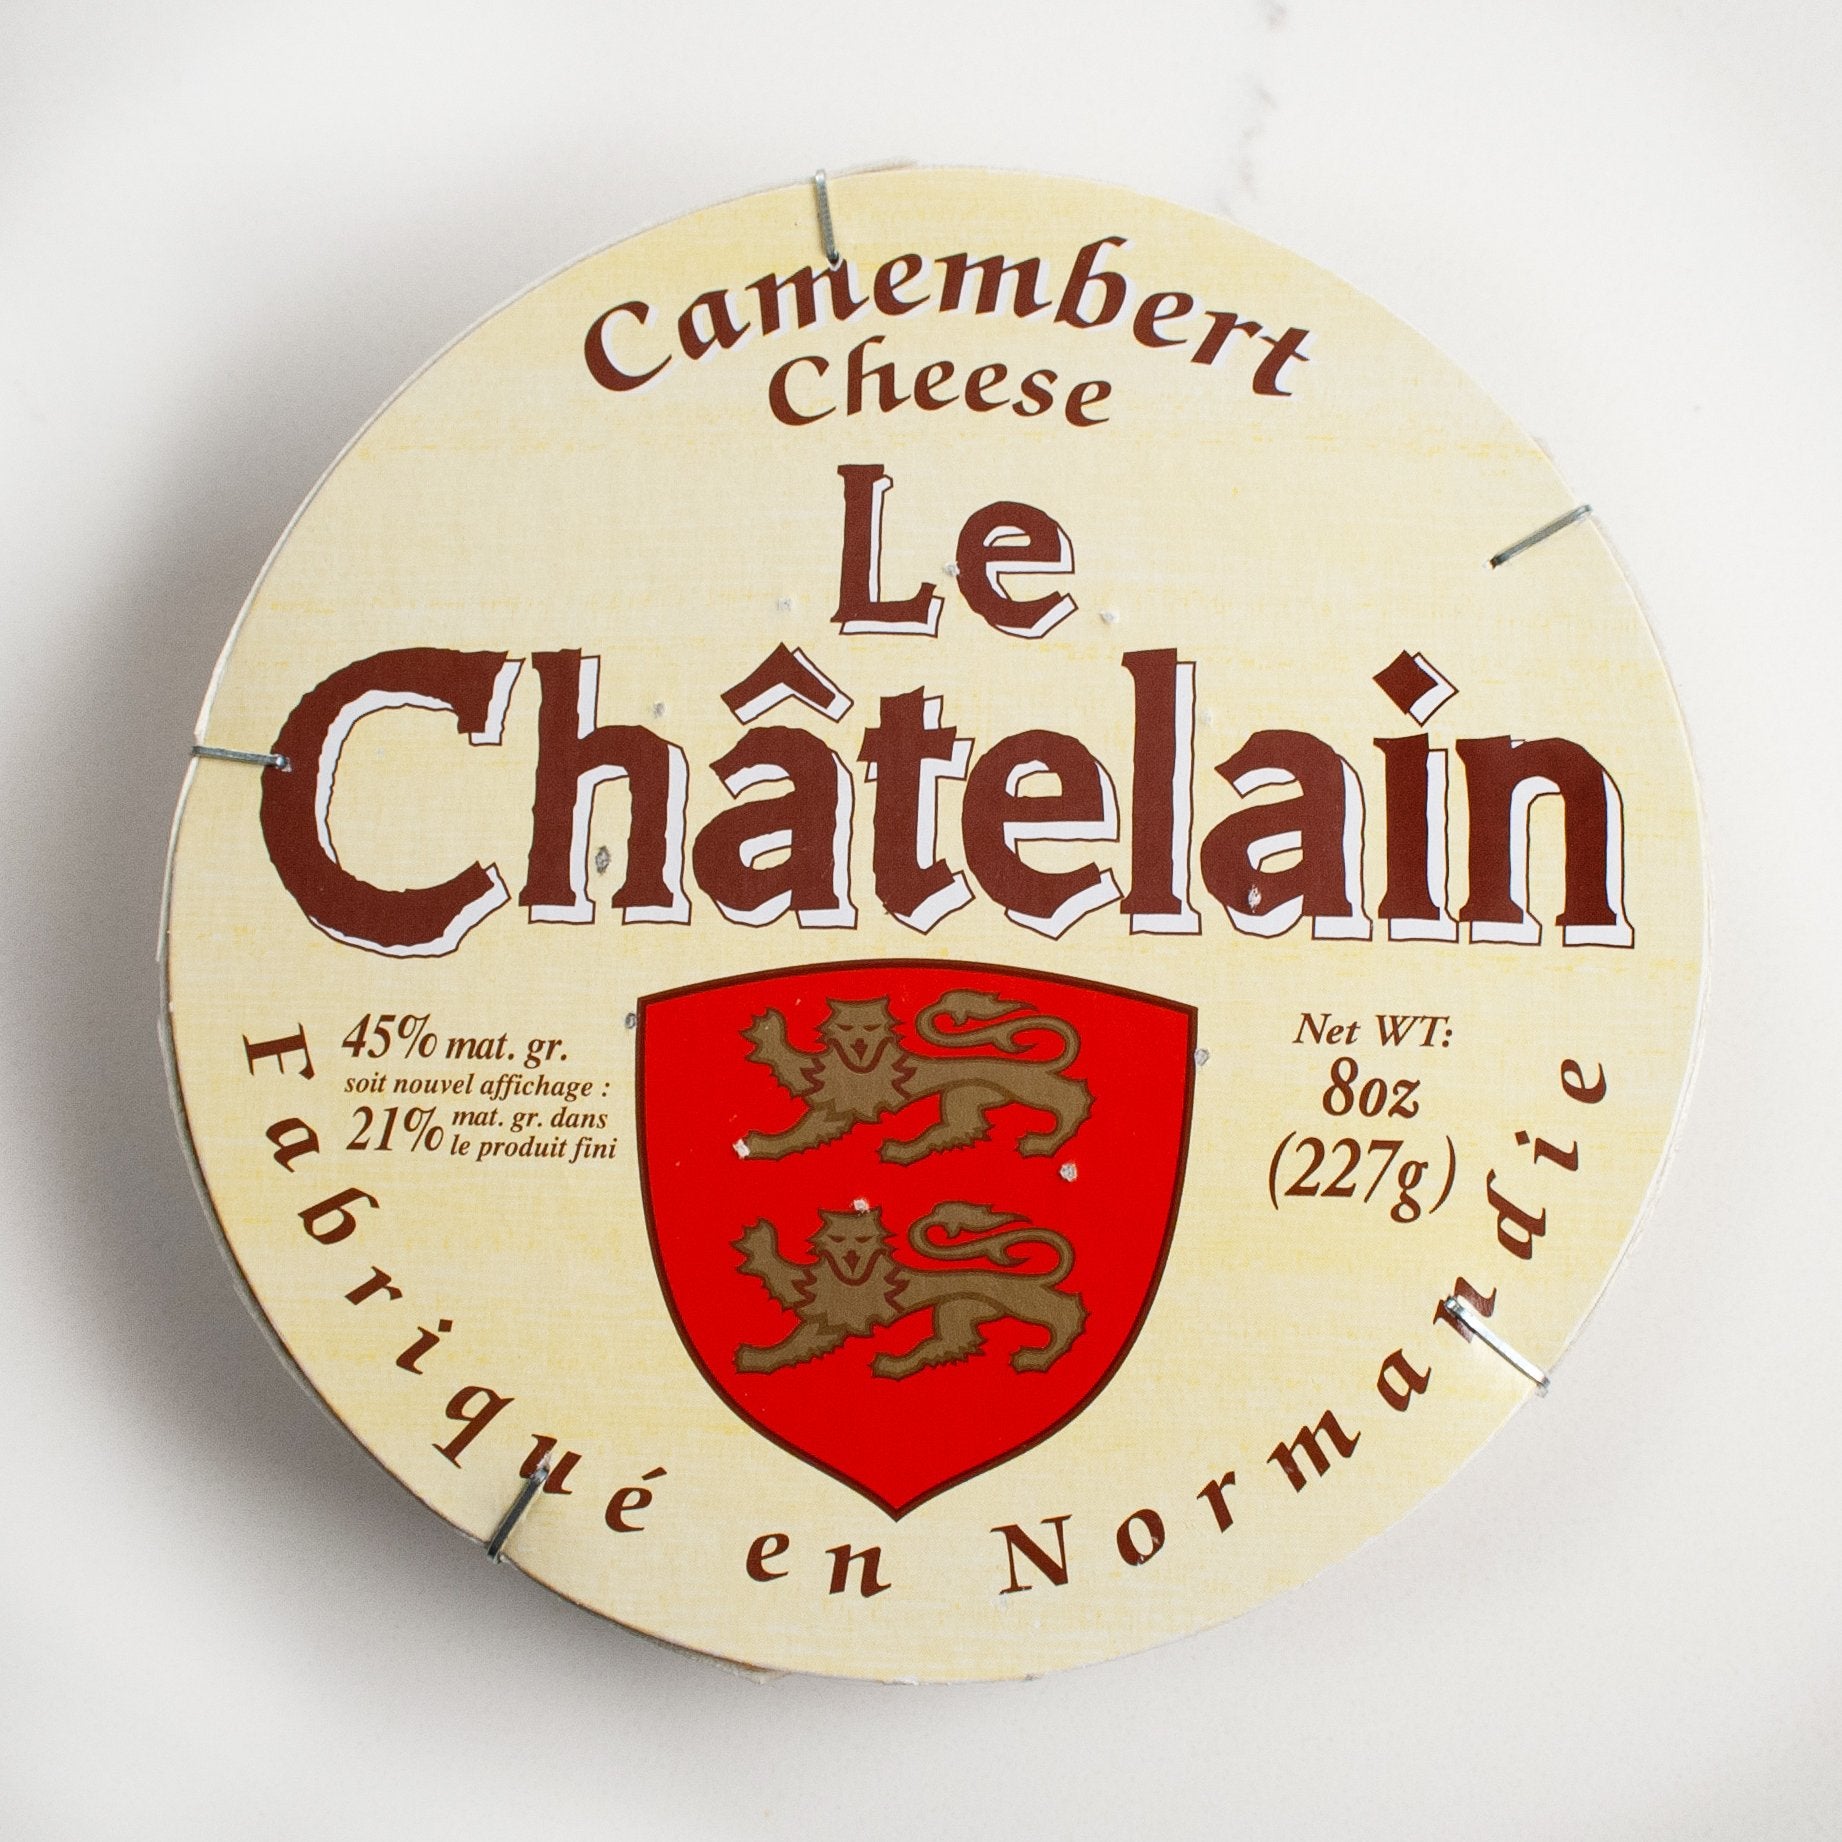 French Cheese Camembert Le Bocage - 8.8 oz - Imported From France Cow Milk